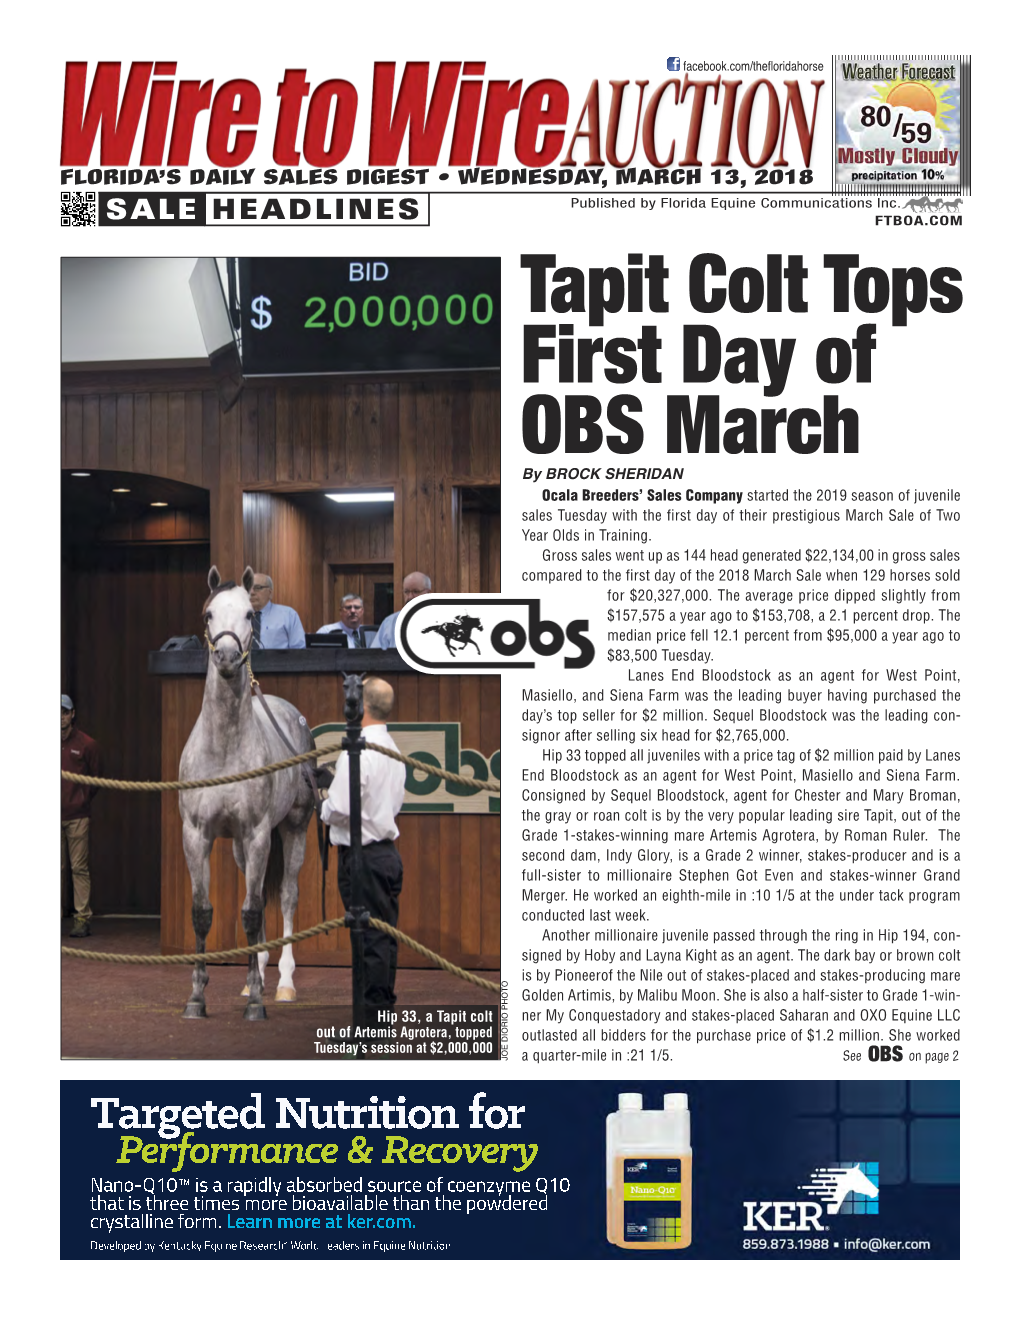 Tapit Colt Tops First Day of OBS March